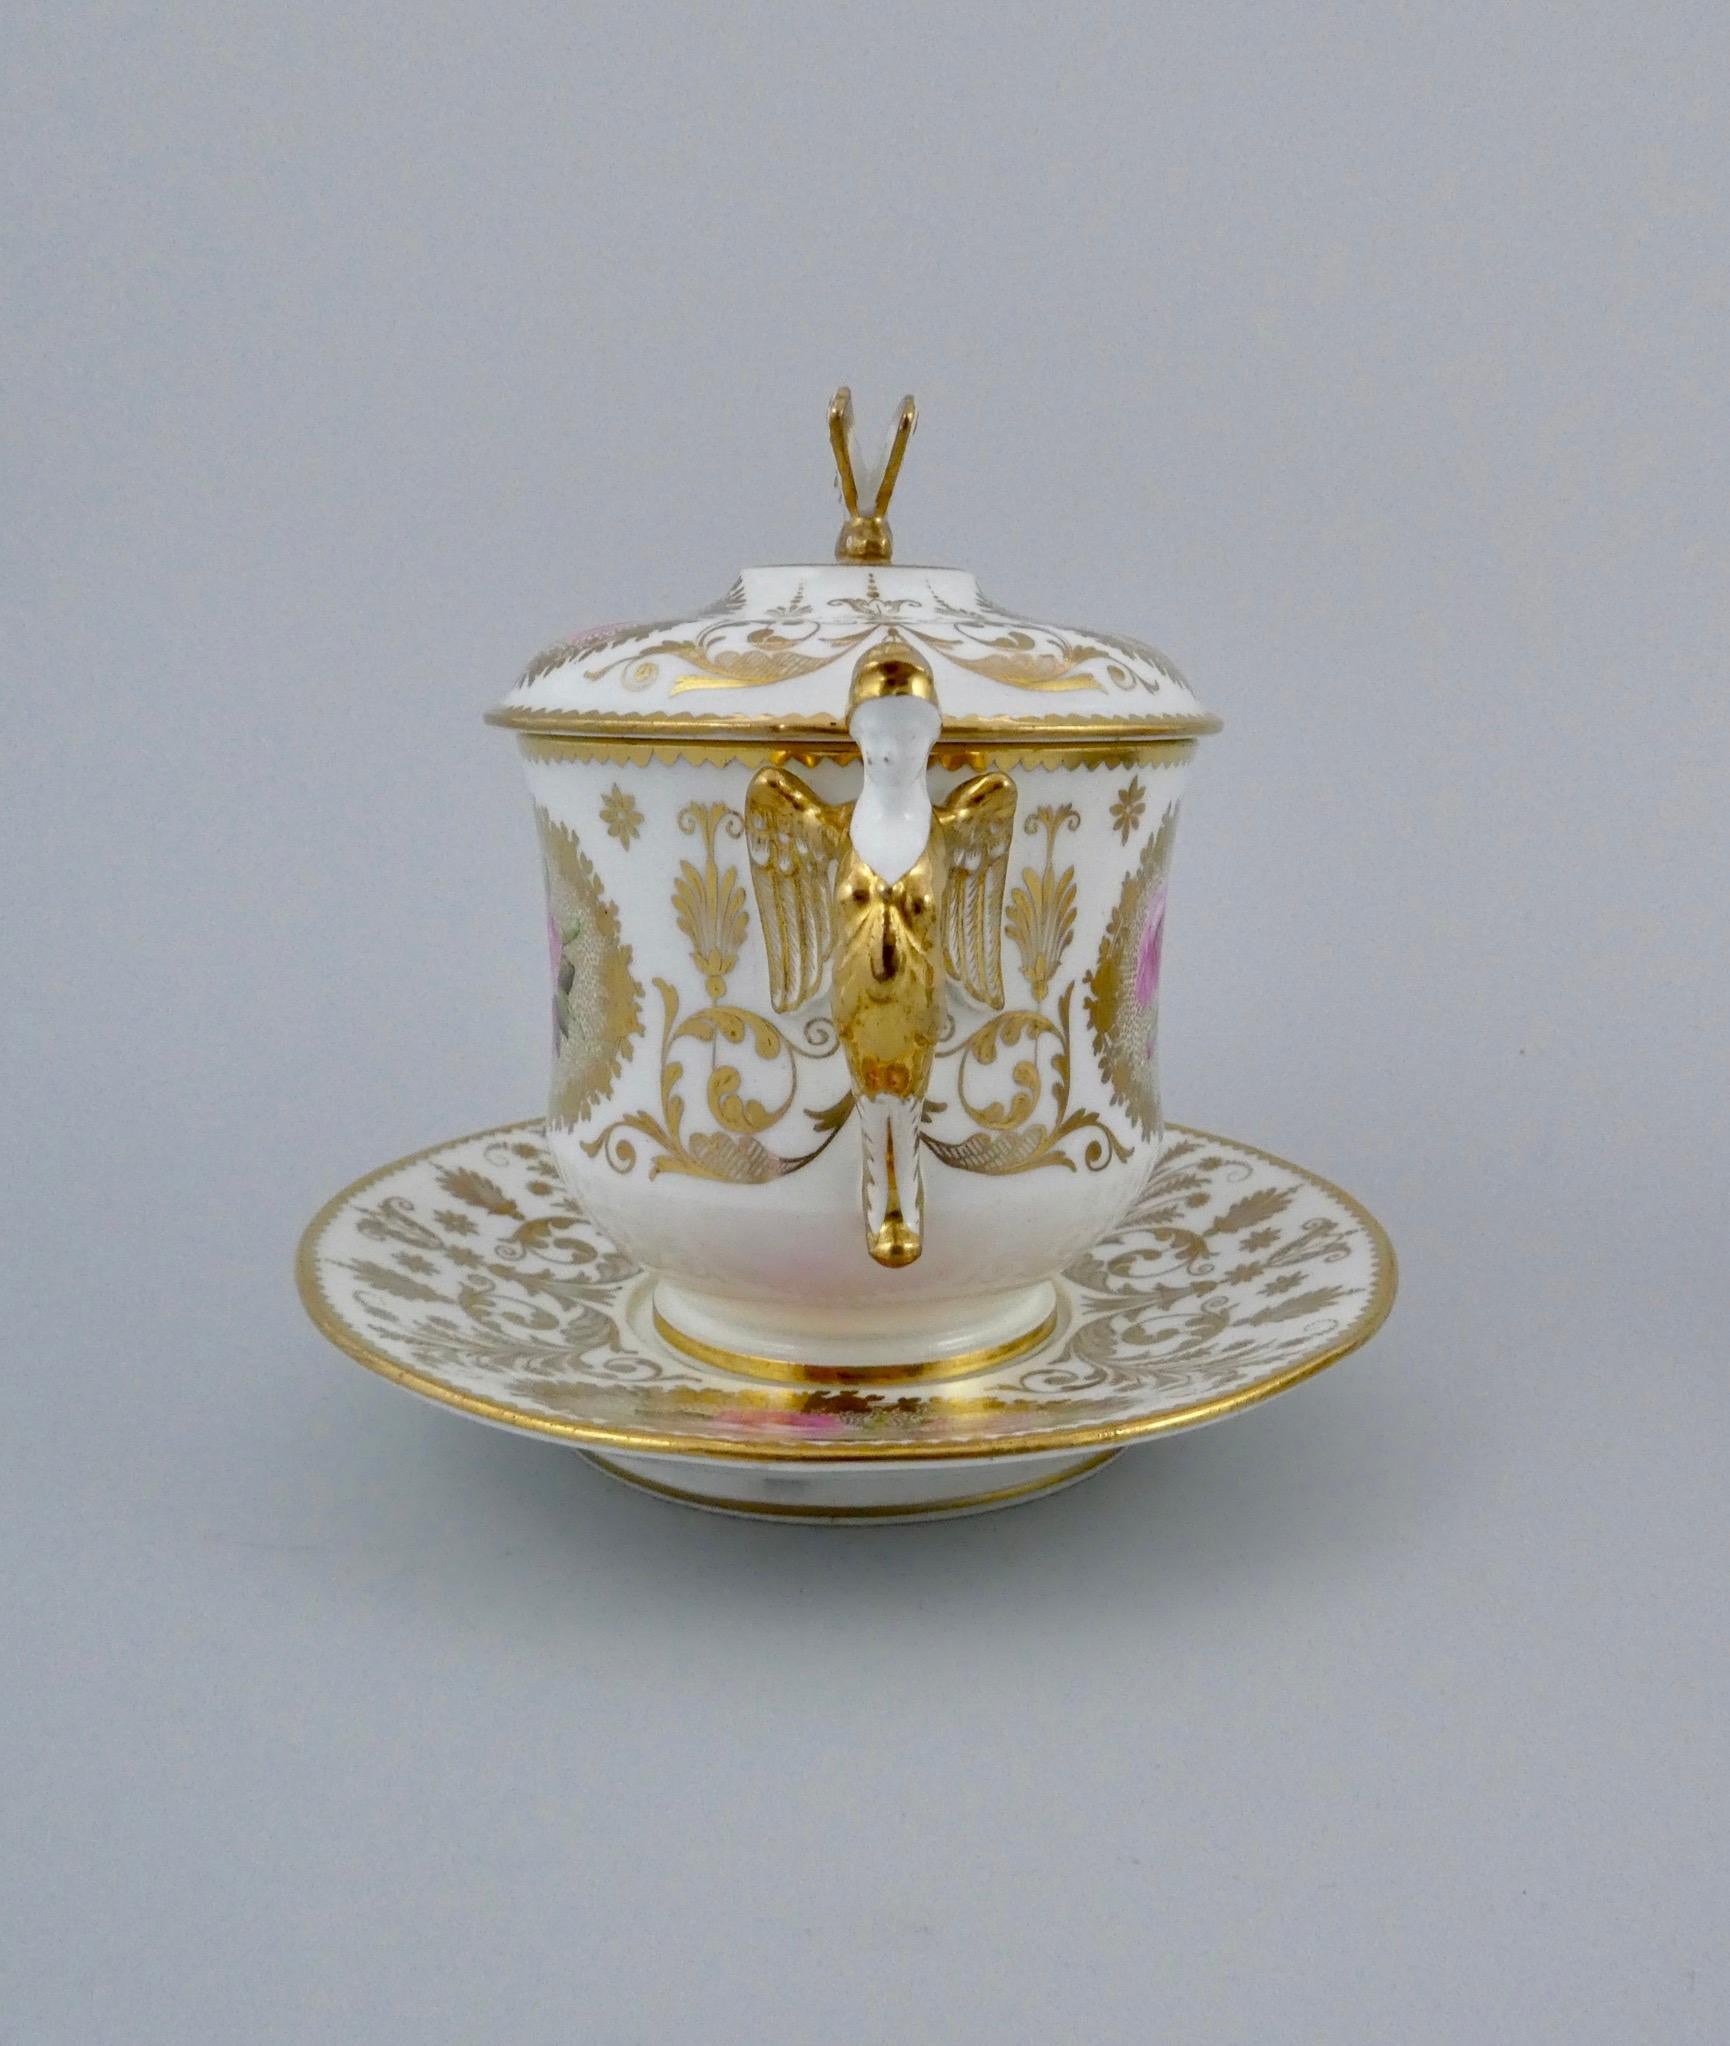 Regency Pair of Spode Covered Cups and Stands, circa 1820